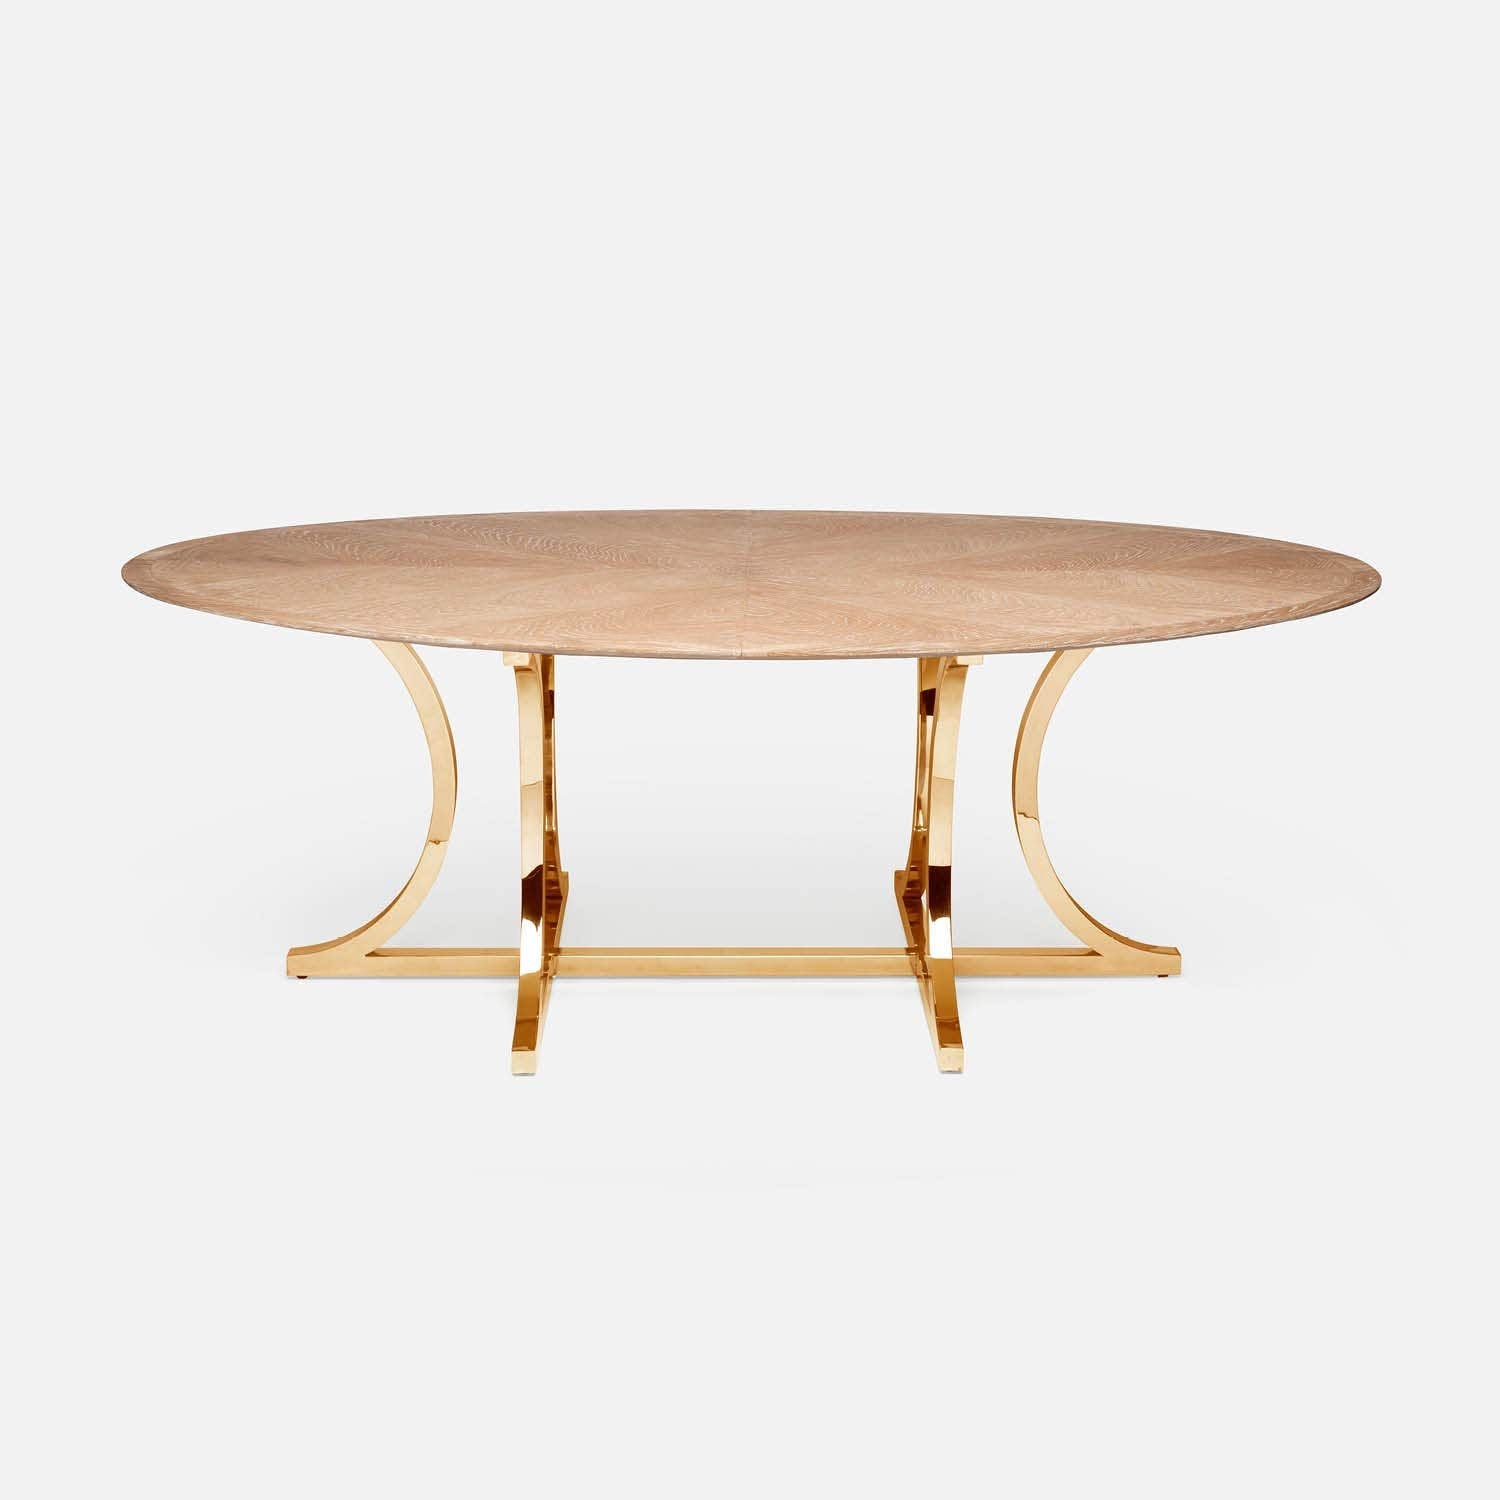 Made Goods Leighton 72" x 42" x 30" Polished Gold Steel Dinning Table With Oval White Cerused Oak Table Top